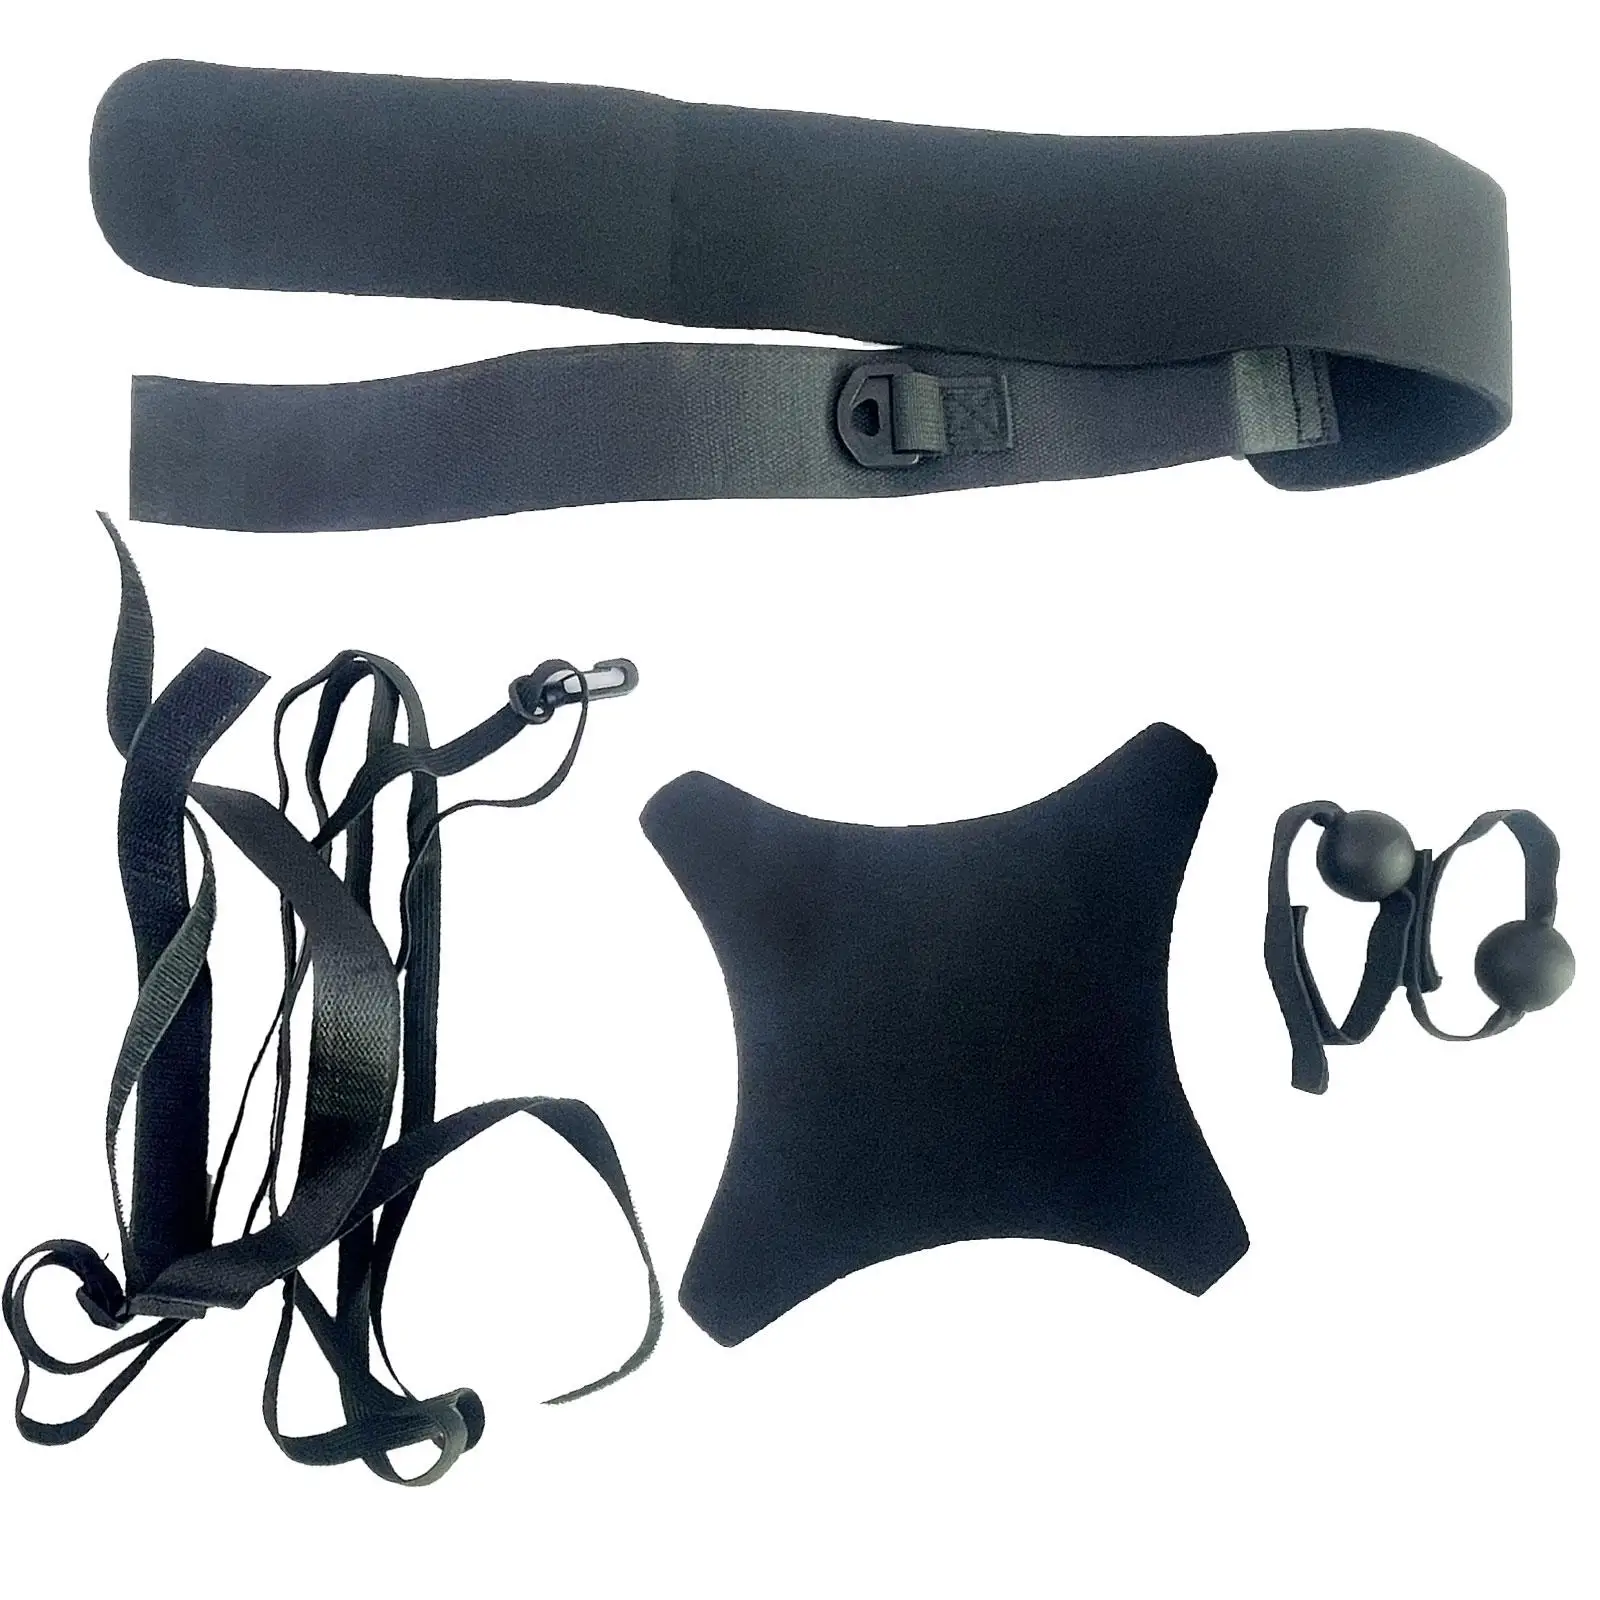 Volleyball Training Equipment Aid Football Training Belt for Beginners for Setting